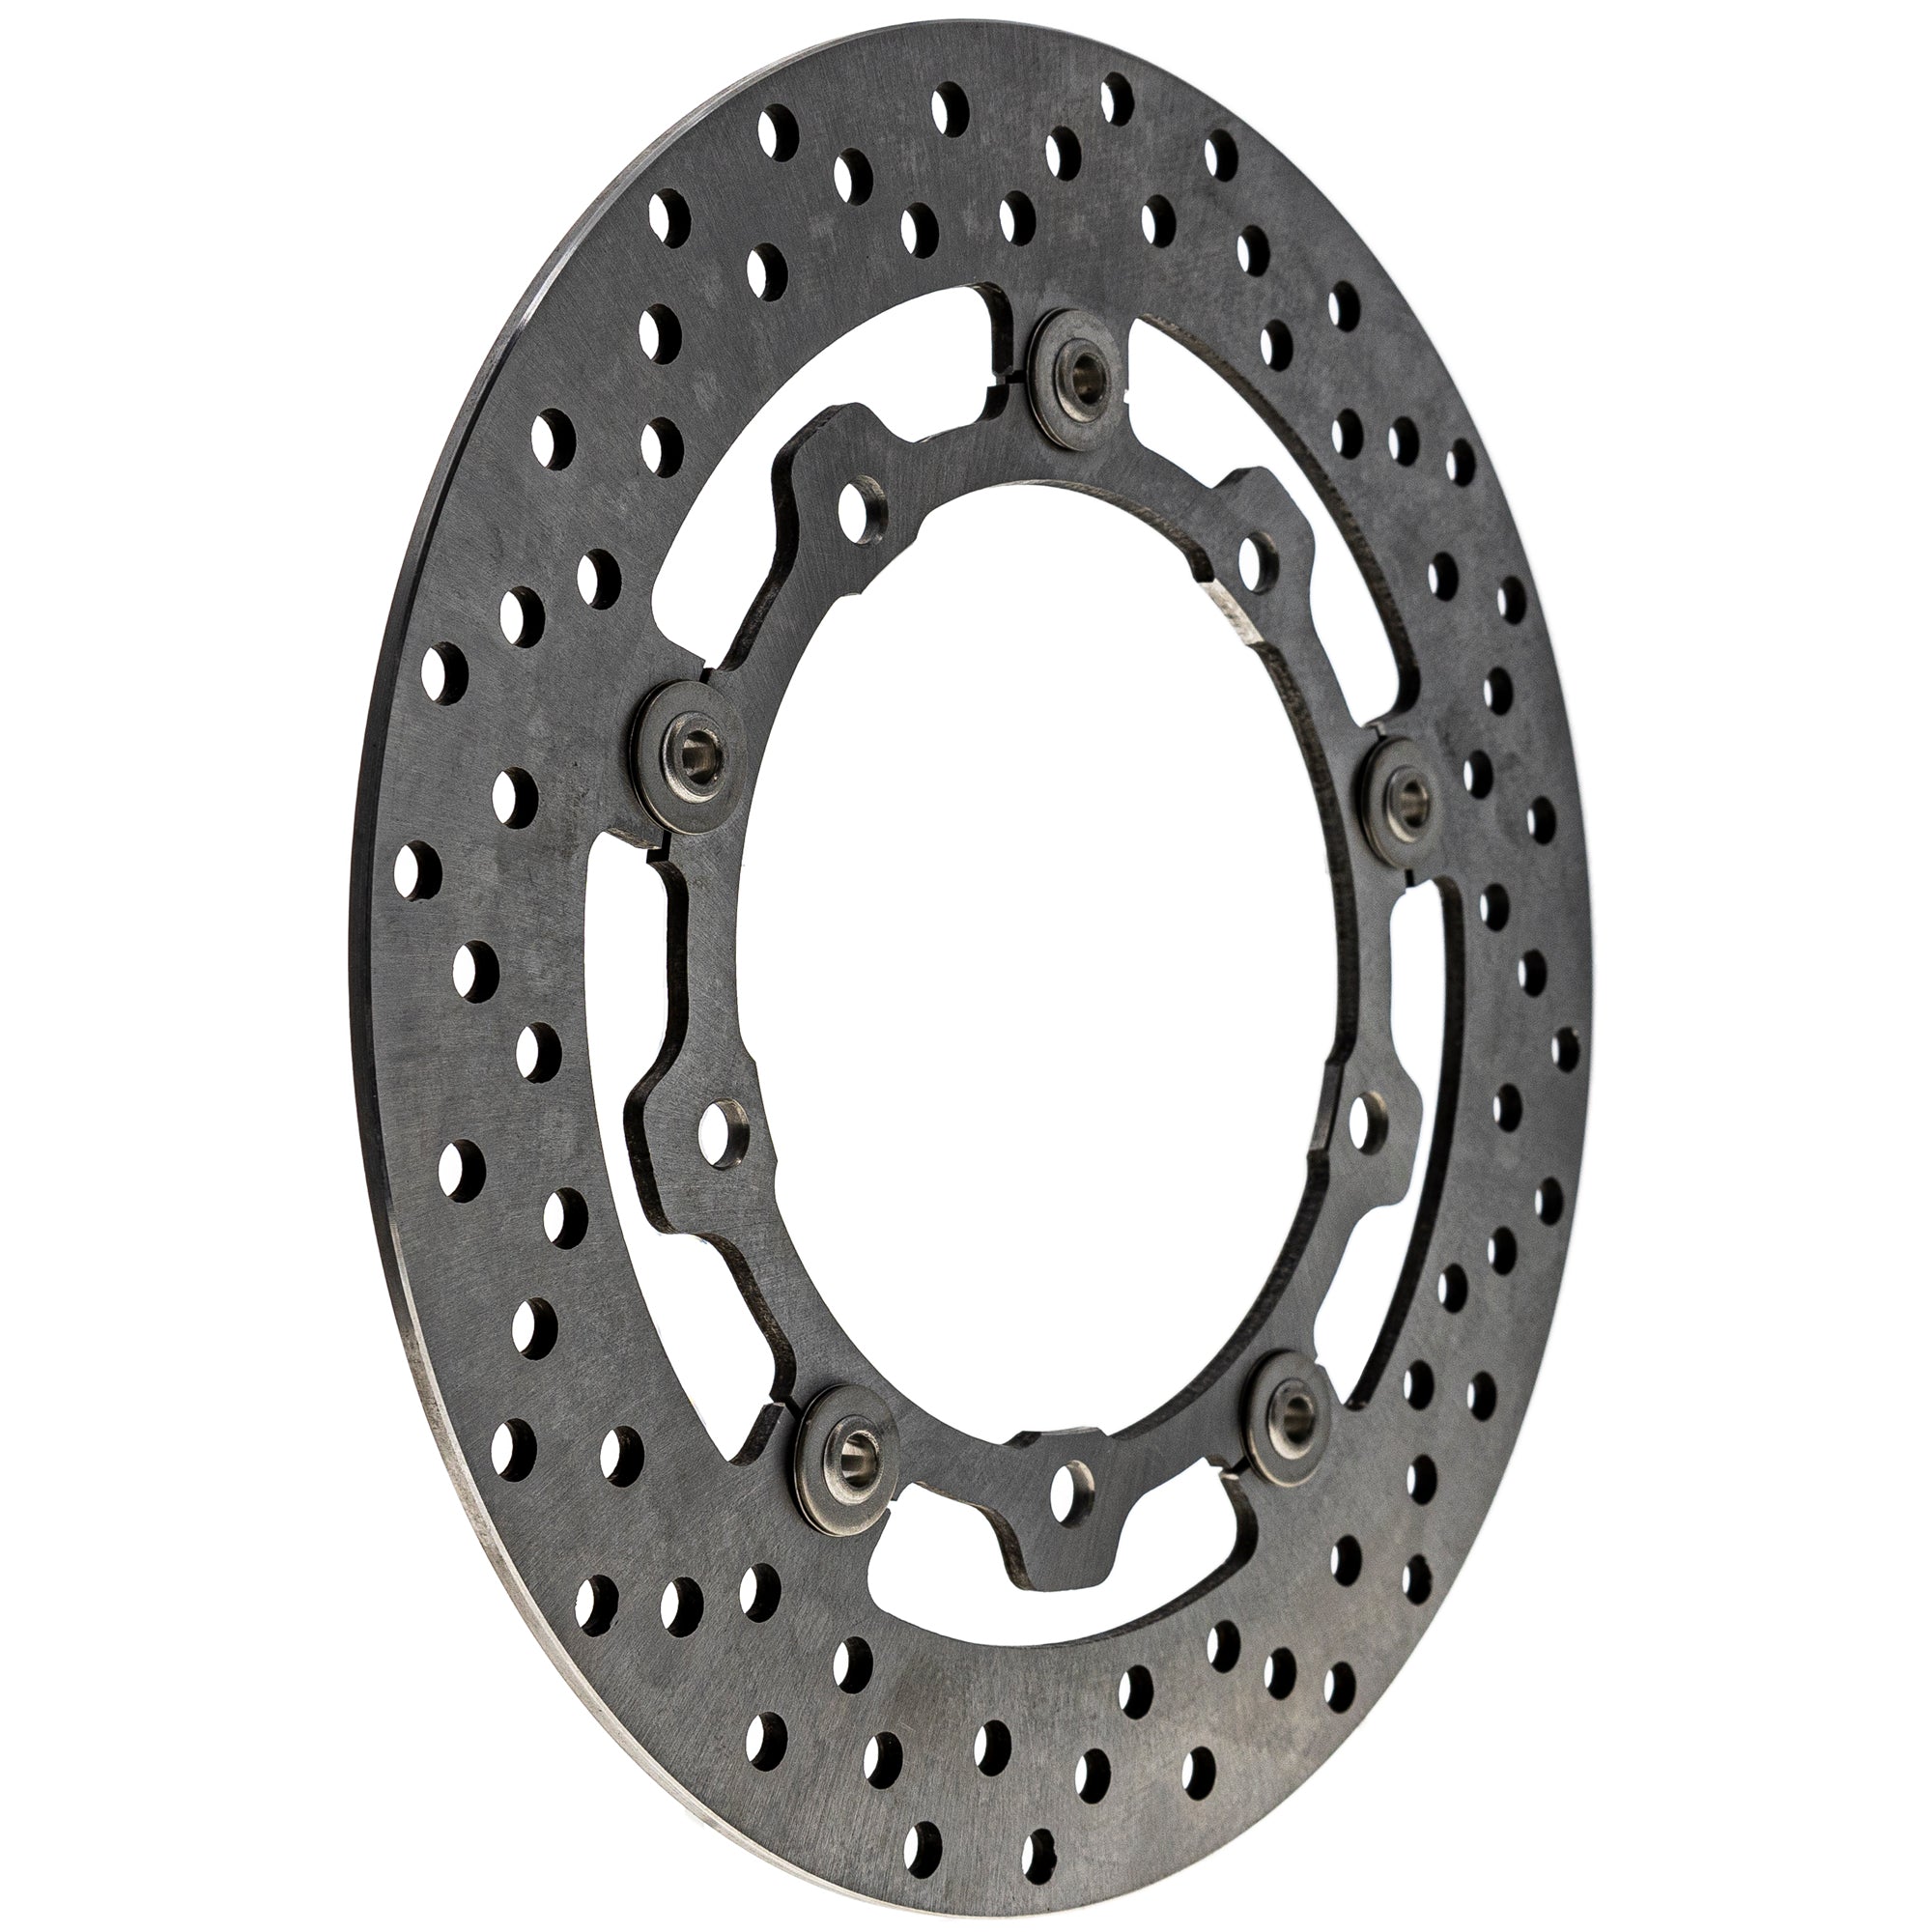 Front Brake Rotor for Yamaha Majesty 400 TMAX 59C-2581T-00-00 Scooter